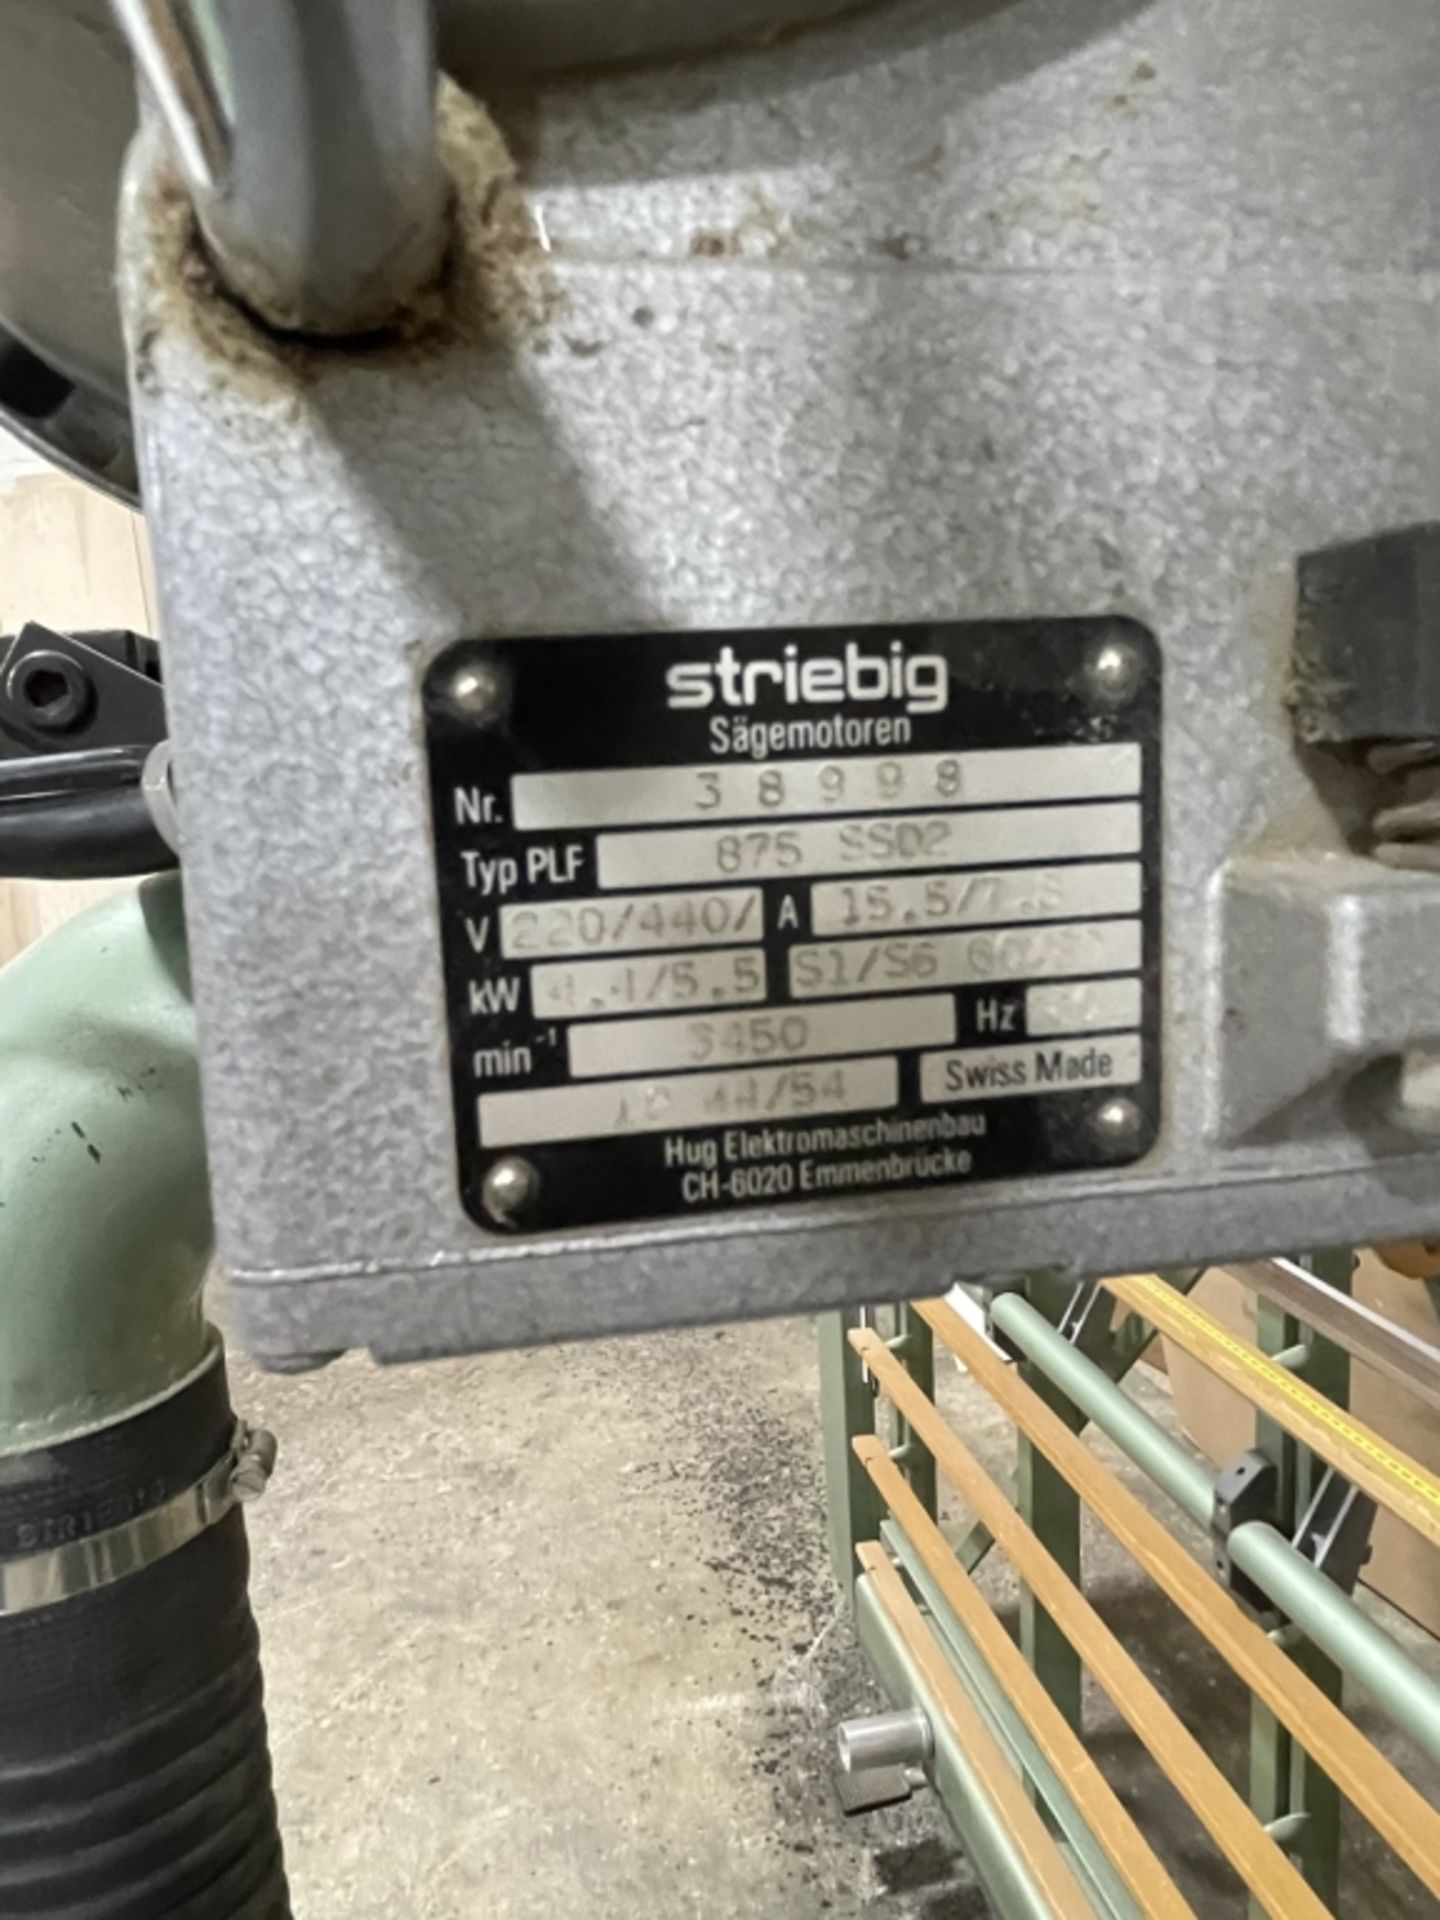 Striebig Standard 5192-A Vertical Panel Saw 7.5 HP - Image 7 of 9